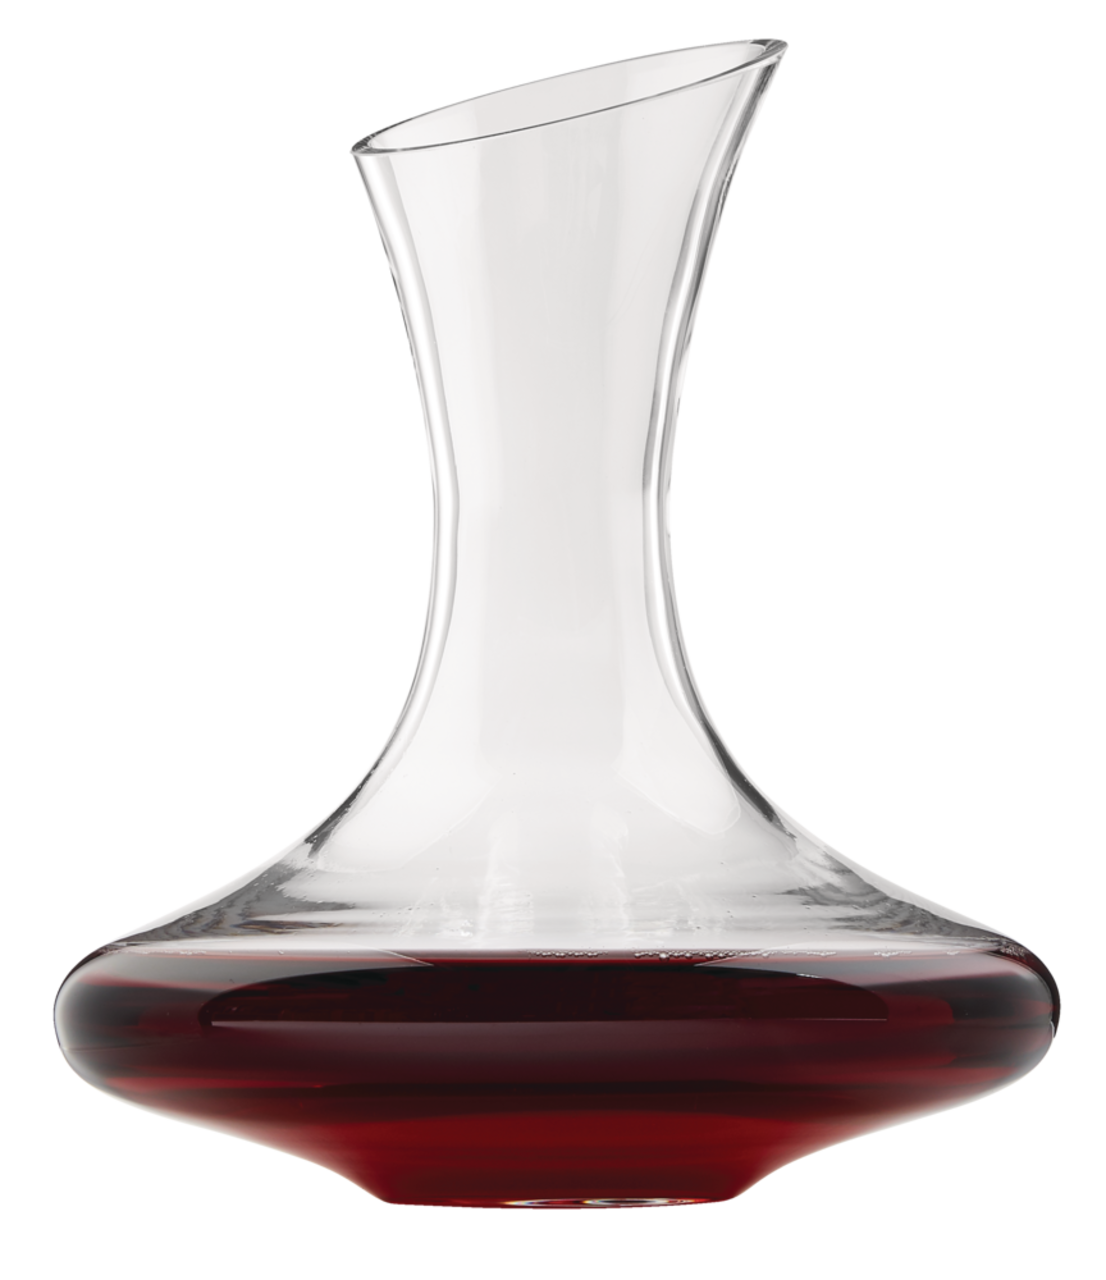 https://media-www.canadiantire.ca/product/living/kitchen/dining-and-entertaining/1426178/trudeau-wine-decanter-1-5l-39eae52e-2fa7-44a2-b807-92ee25e9c409.png?imdensity=1&imwidth=640&impolicy=mZoom